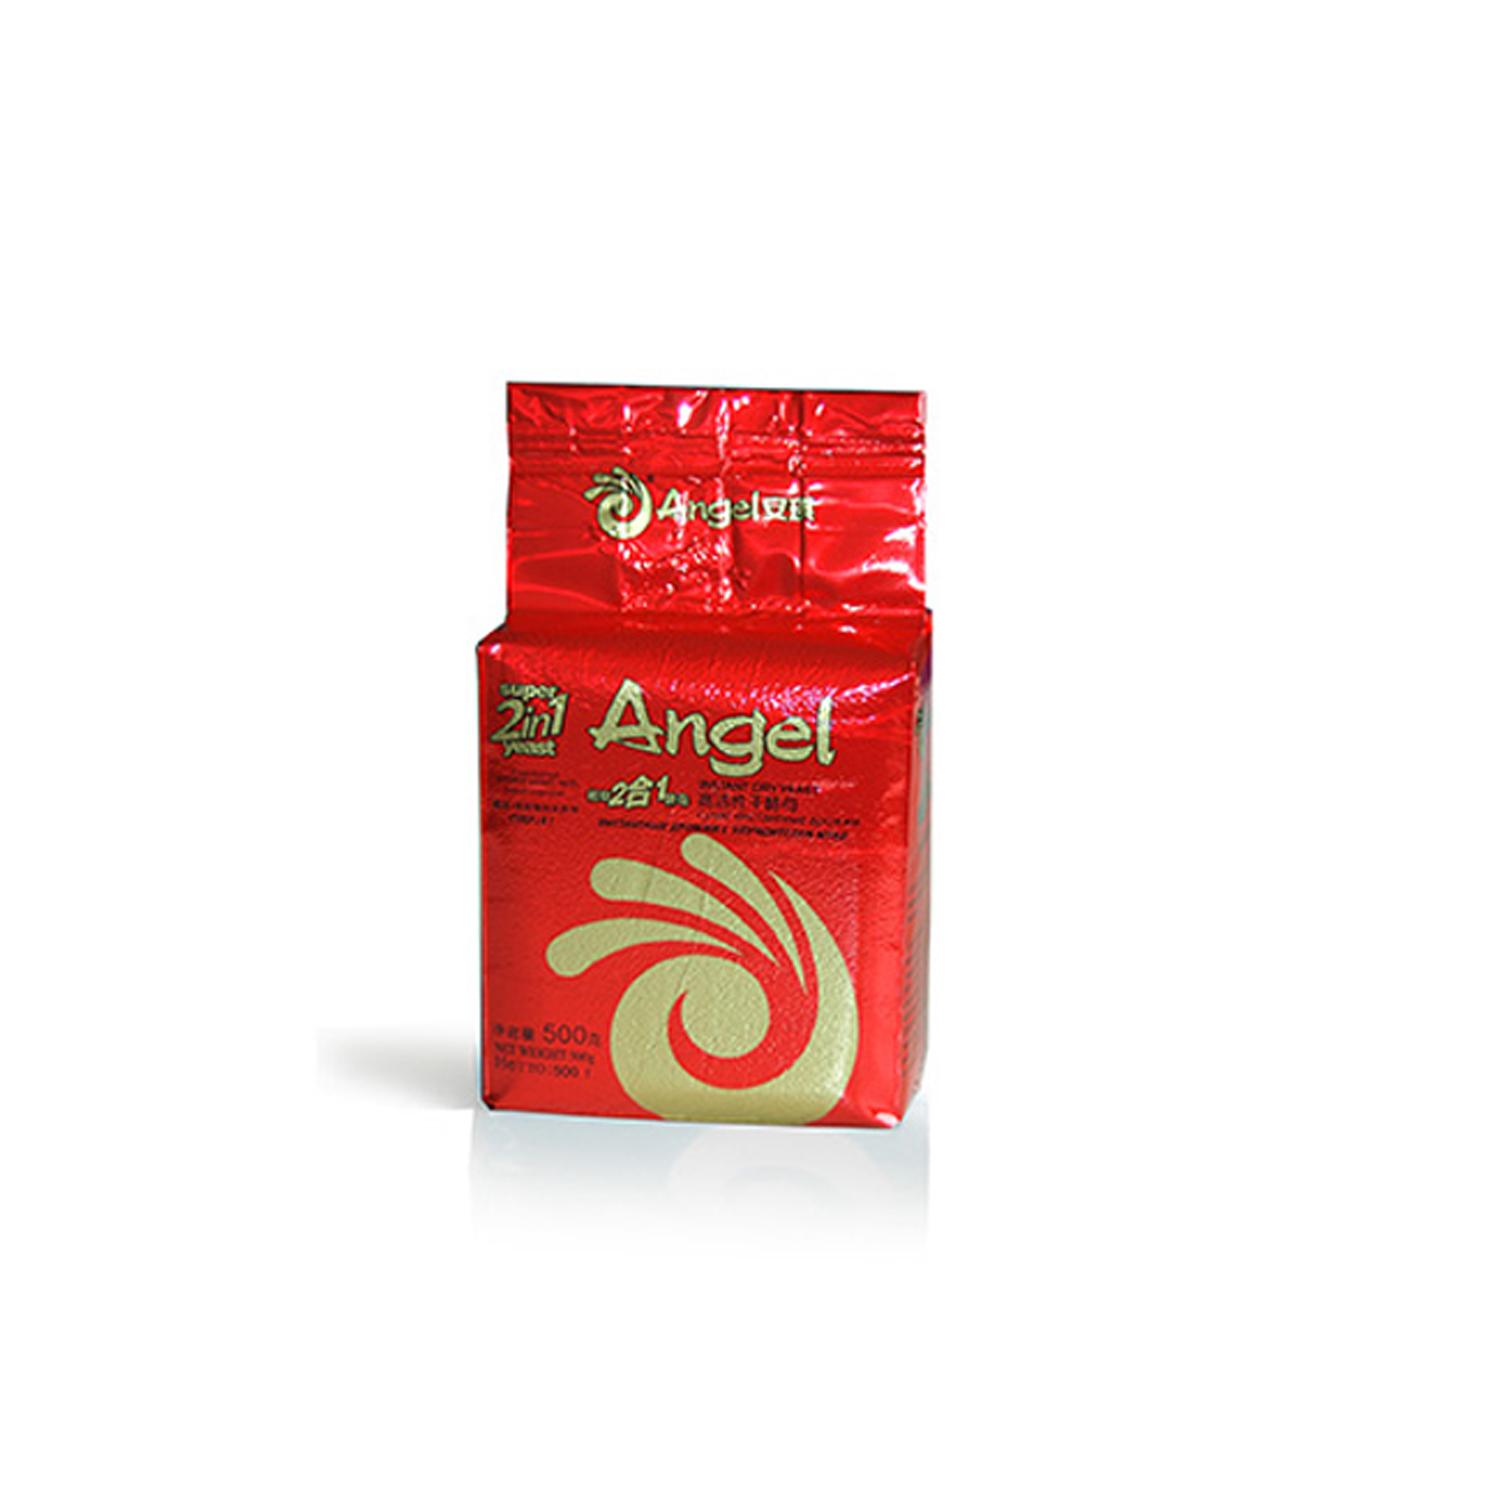 ANGEL SUPER 2 IN 1 INSTANT DRY YEAST